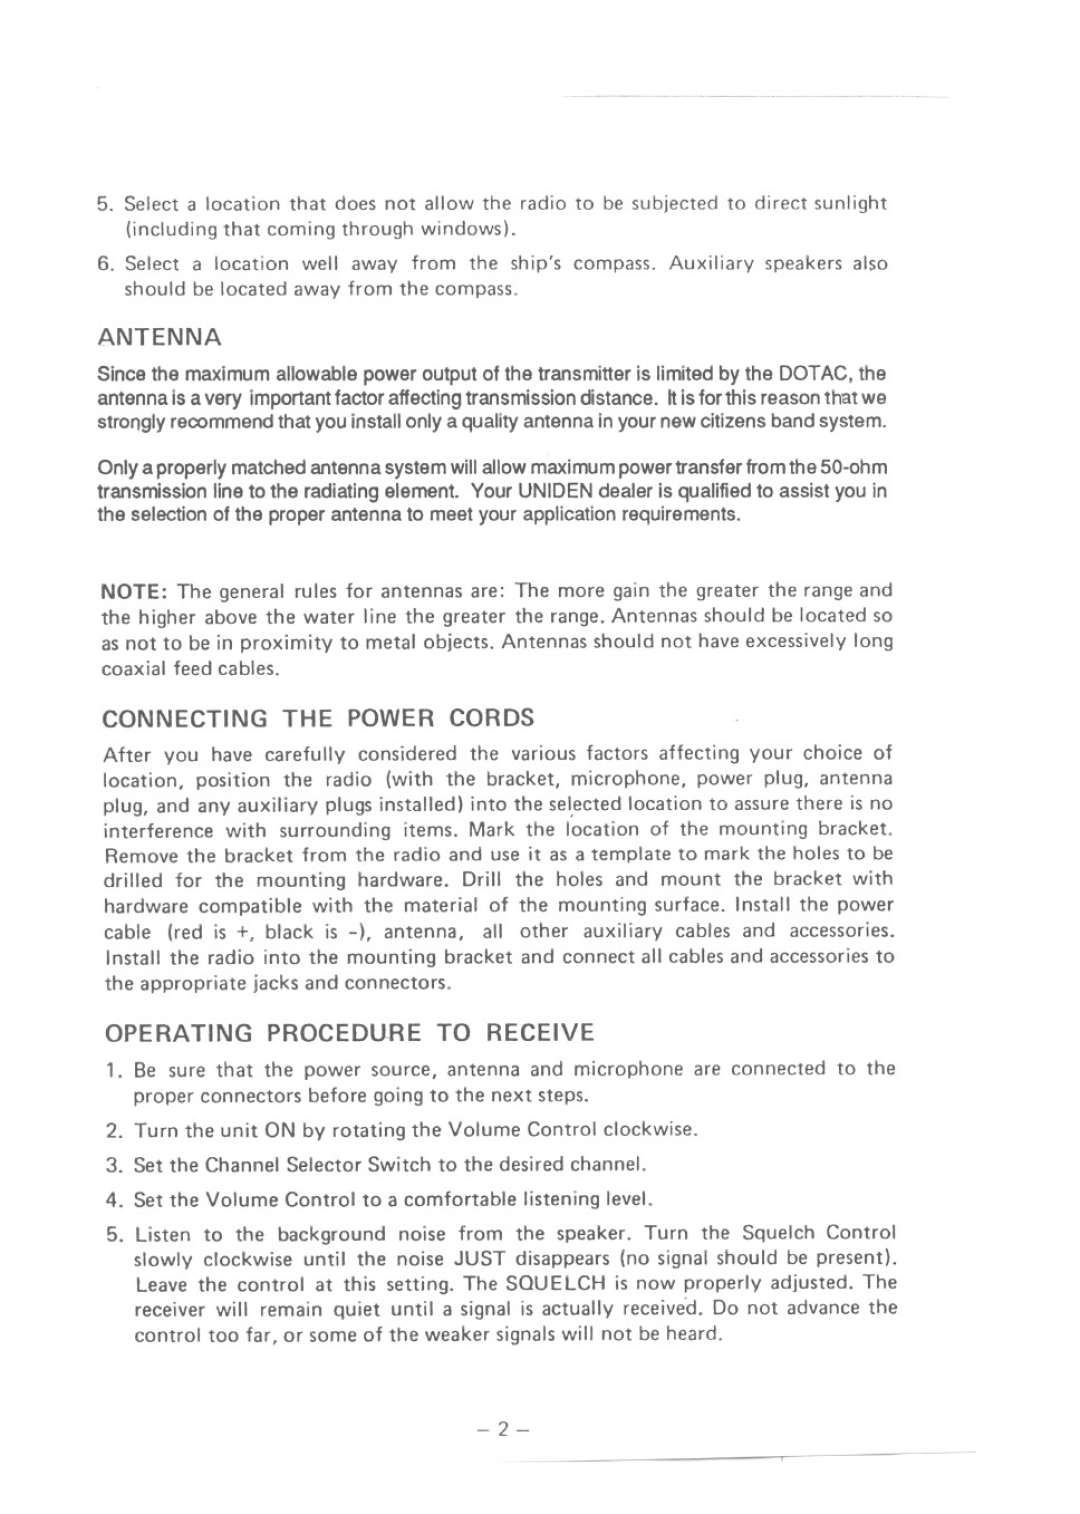 Uniden MC2700 manual Operating Procedure To Receive, Antenna, Connecting The Power Cords 